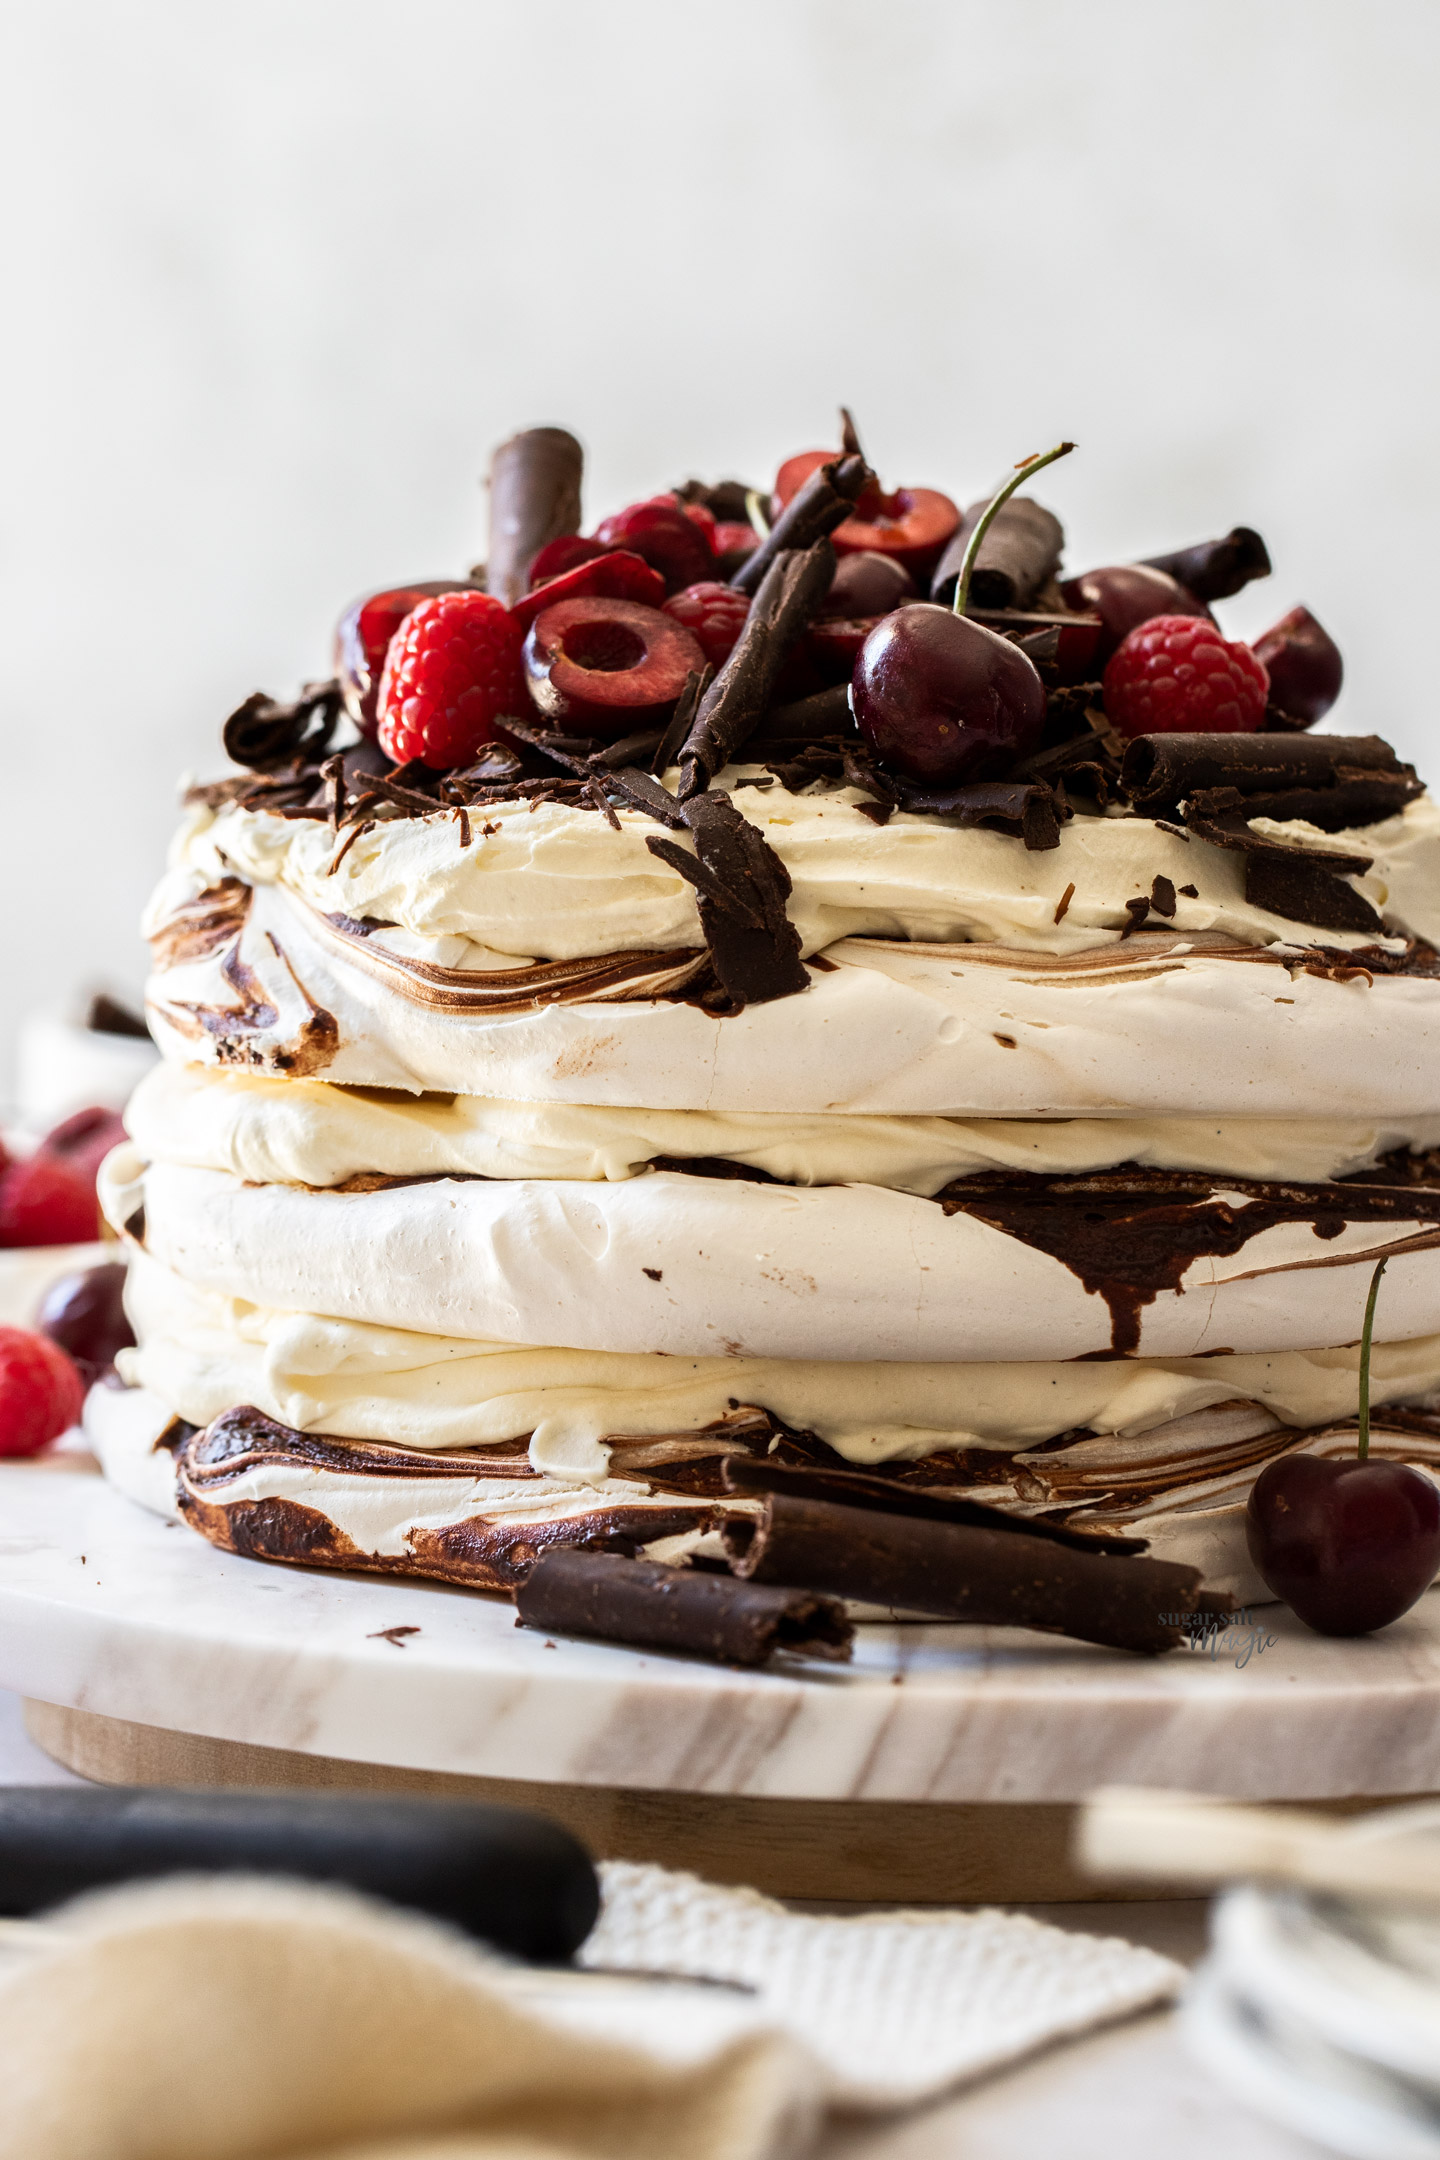 A 3 layered meringue cake with cream between the meringue layers.